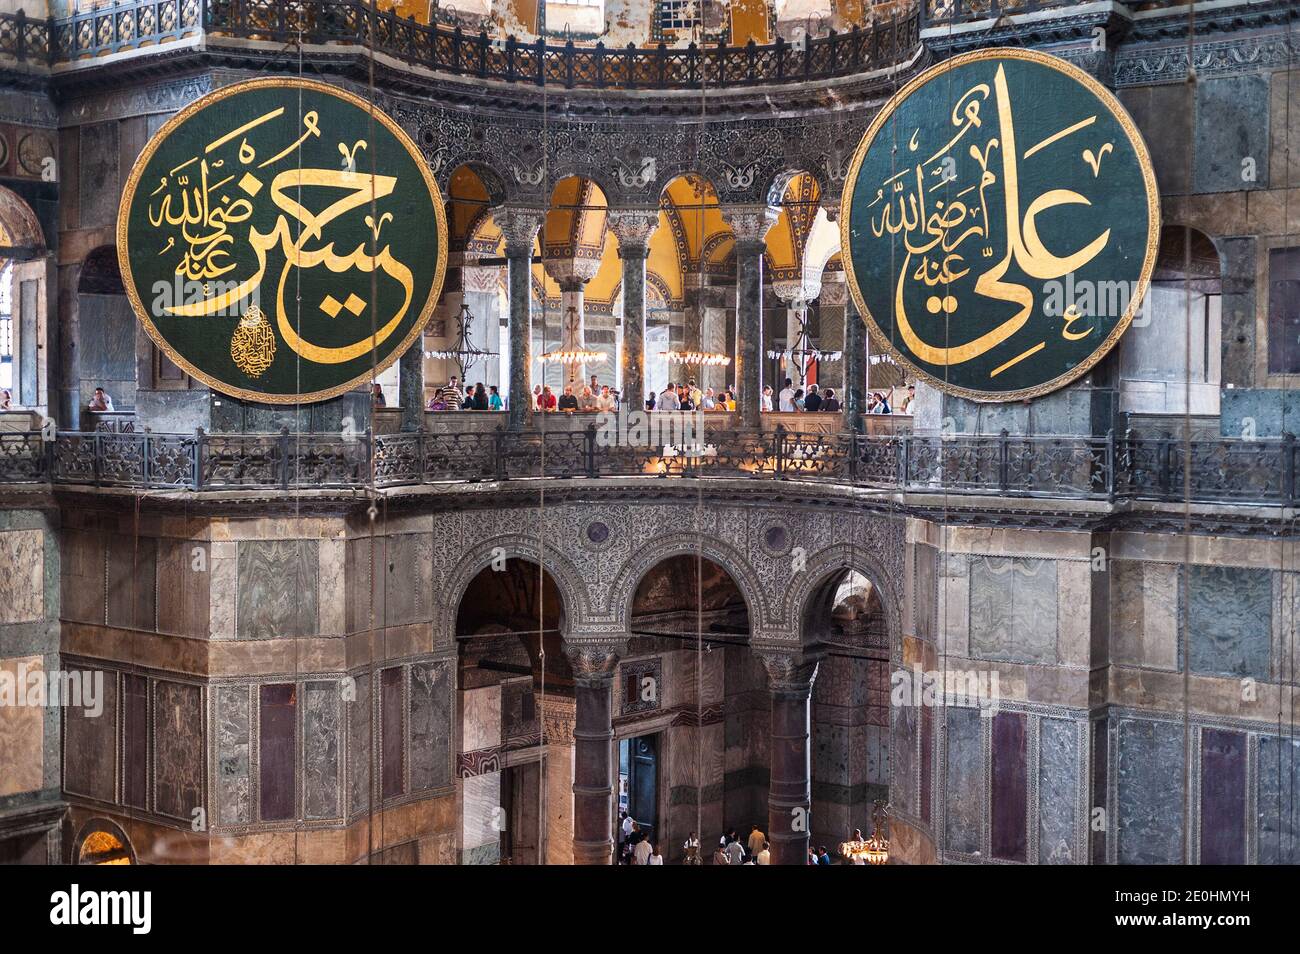 Byzantine Architecture of interior of Hagia Sophia Aya Sophia in Sultanahmet Istanbul with medallion bearing Arabic calligraphy from Ottoman empire Stock Photo